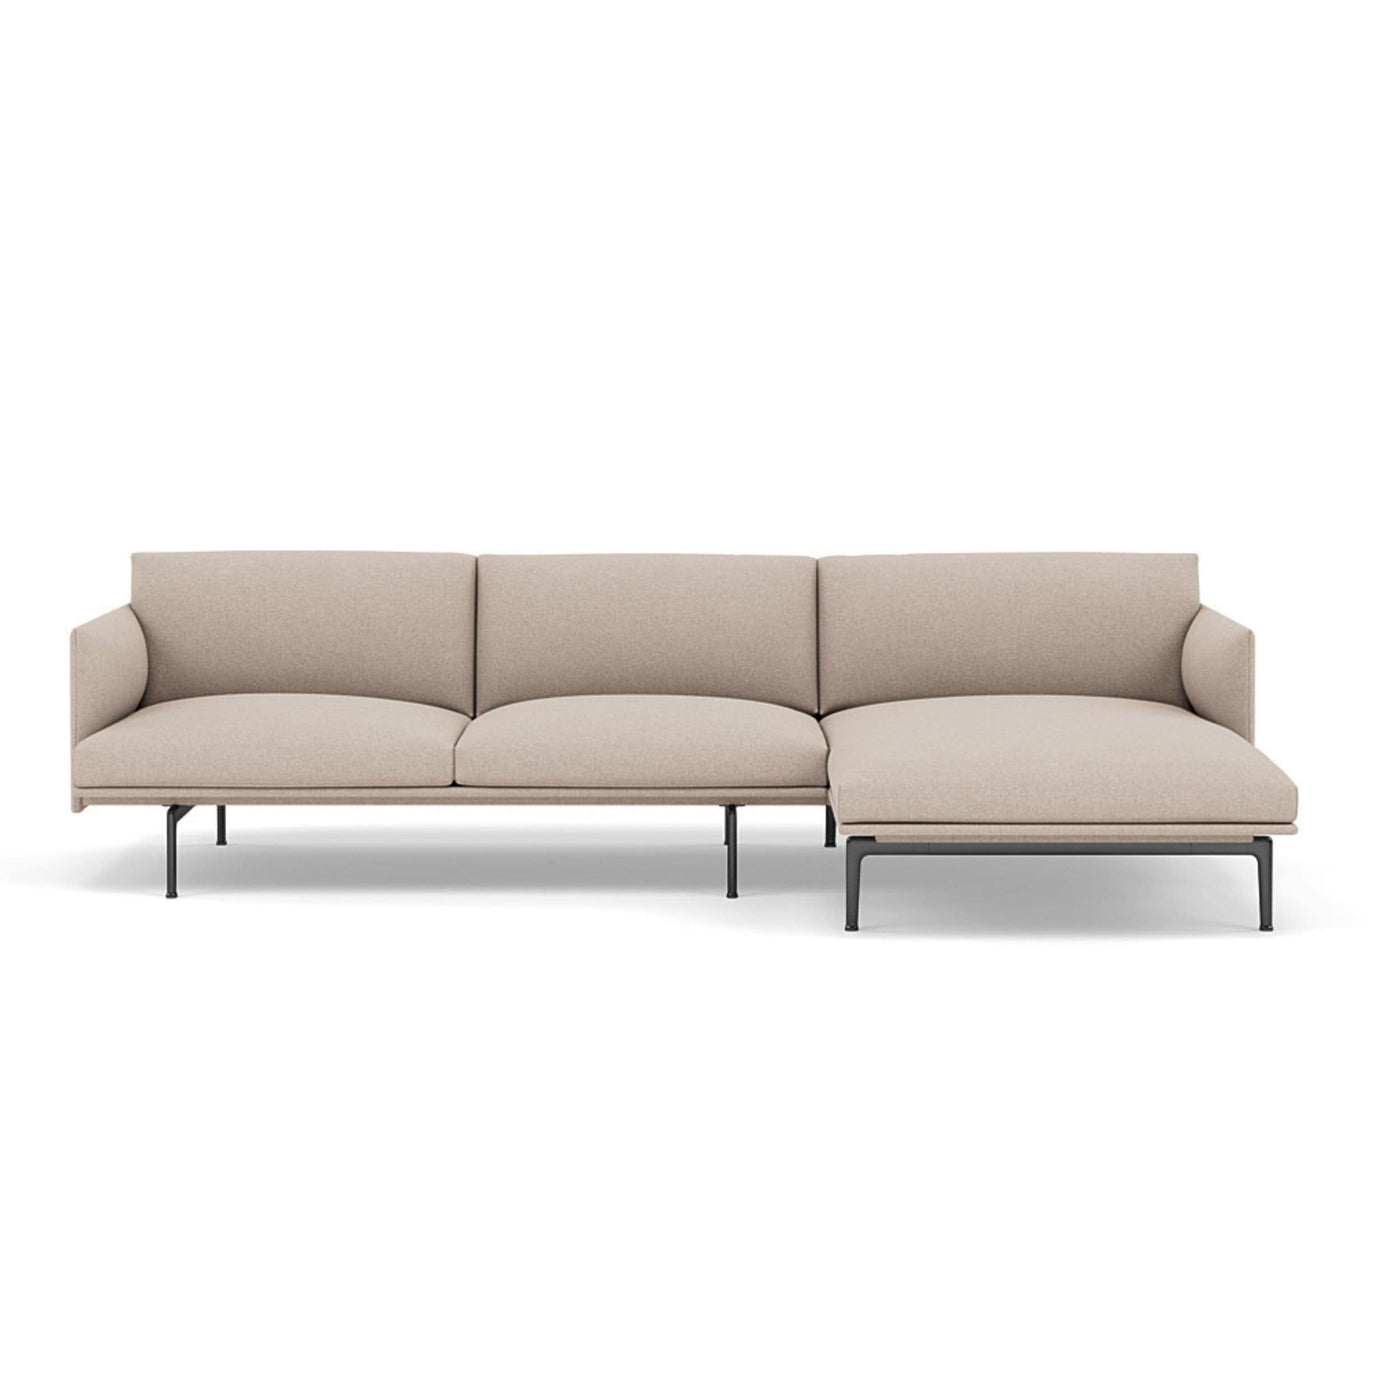 Muuto Outline Chaise Longue sofa in divina md 213. Made to order from someday designs. #colour_divina-md-213-natural